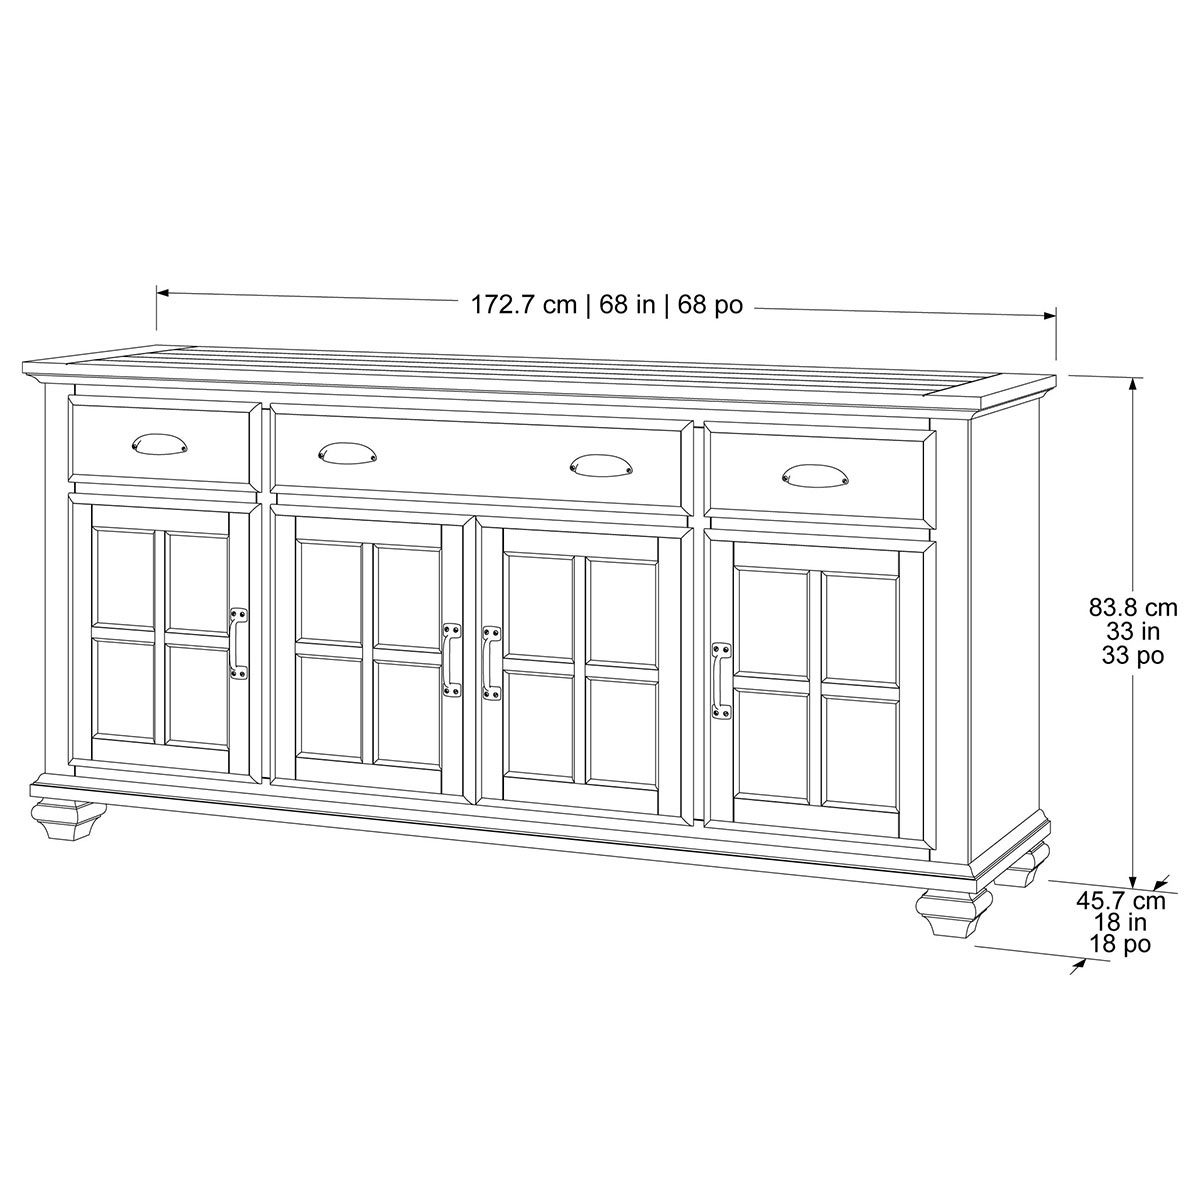 Line drawing of console on white background with dimensions